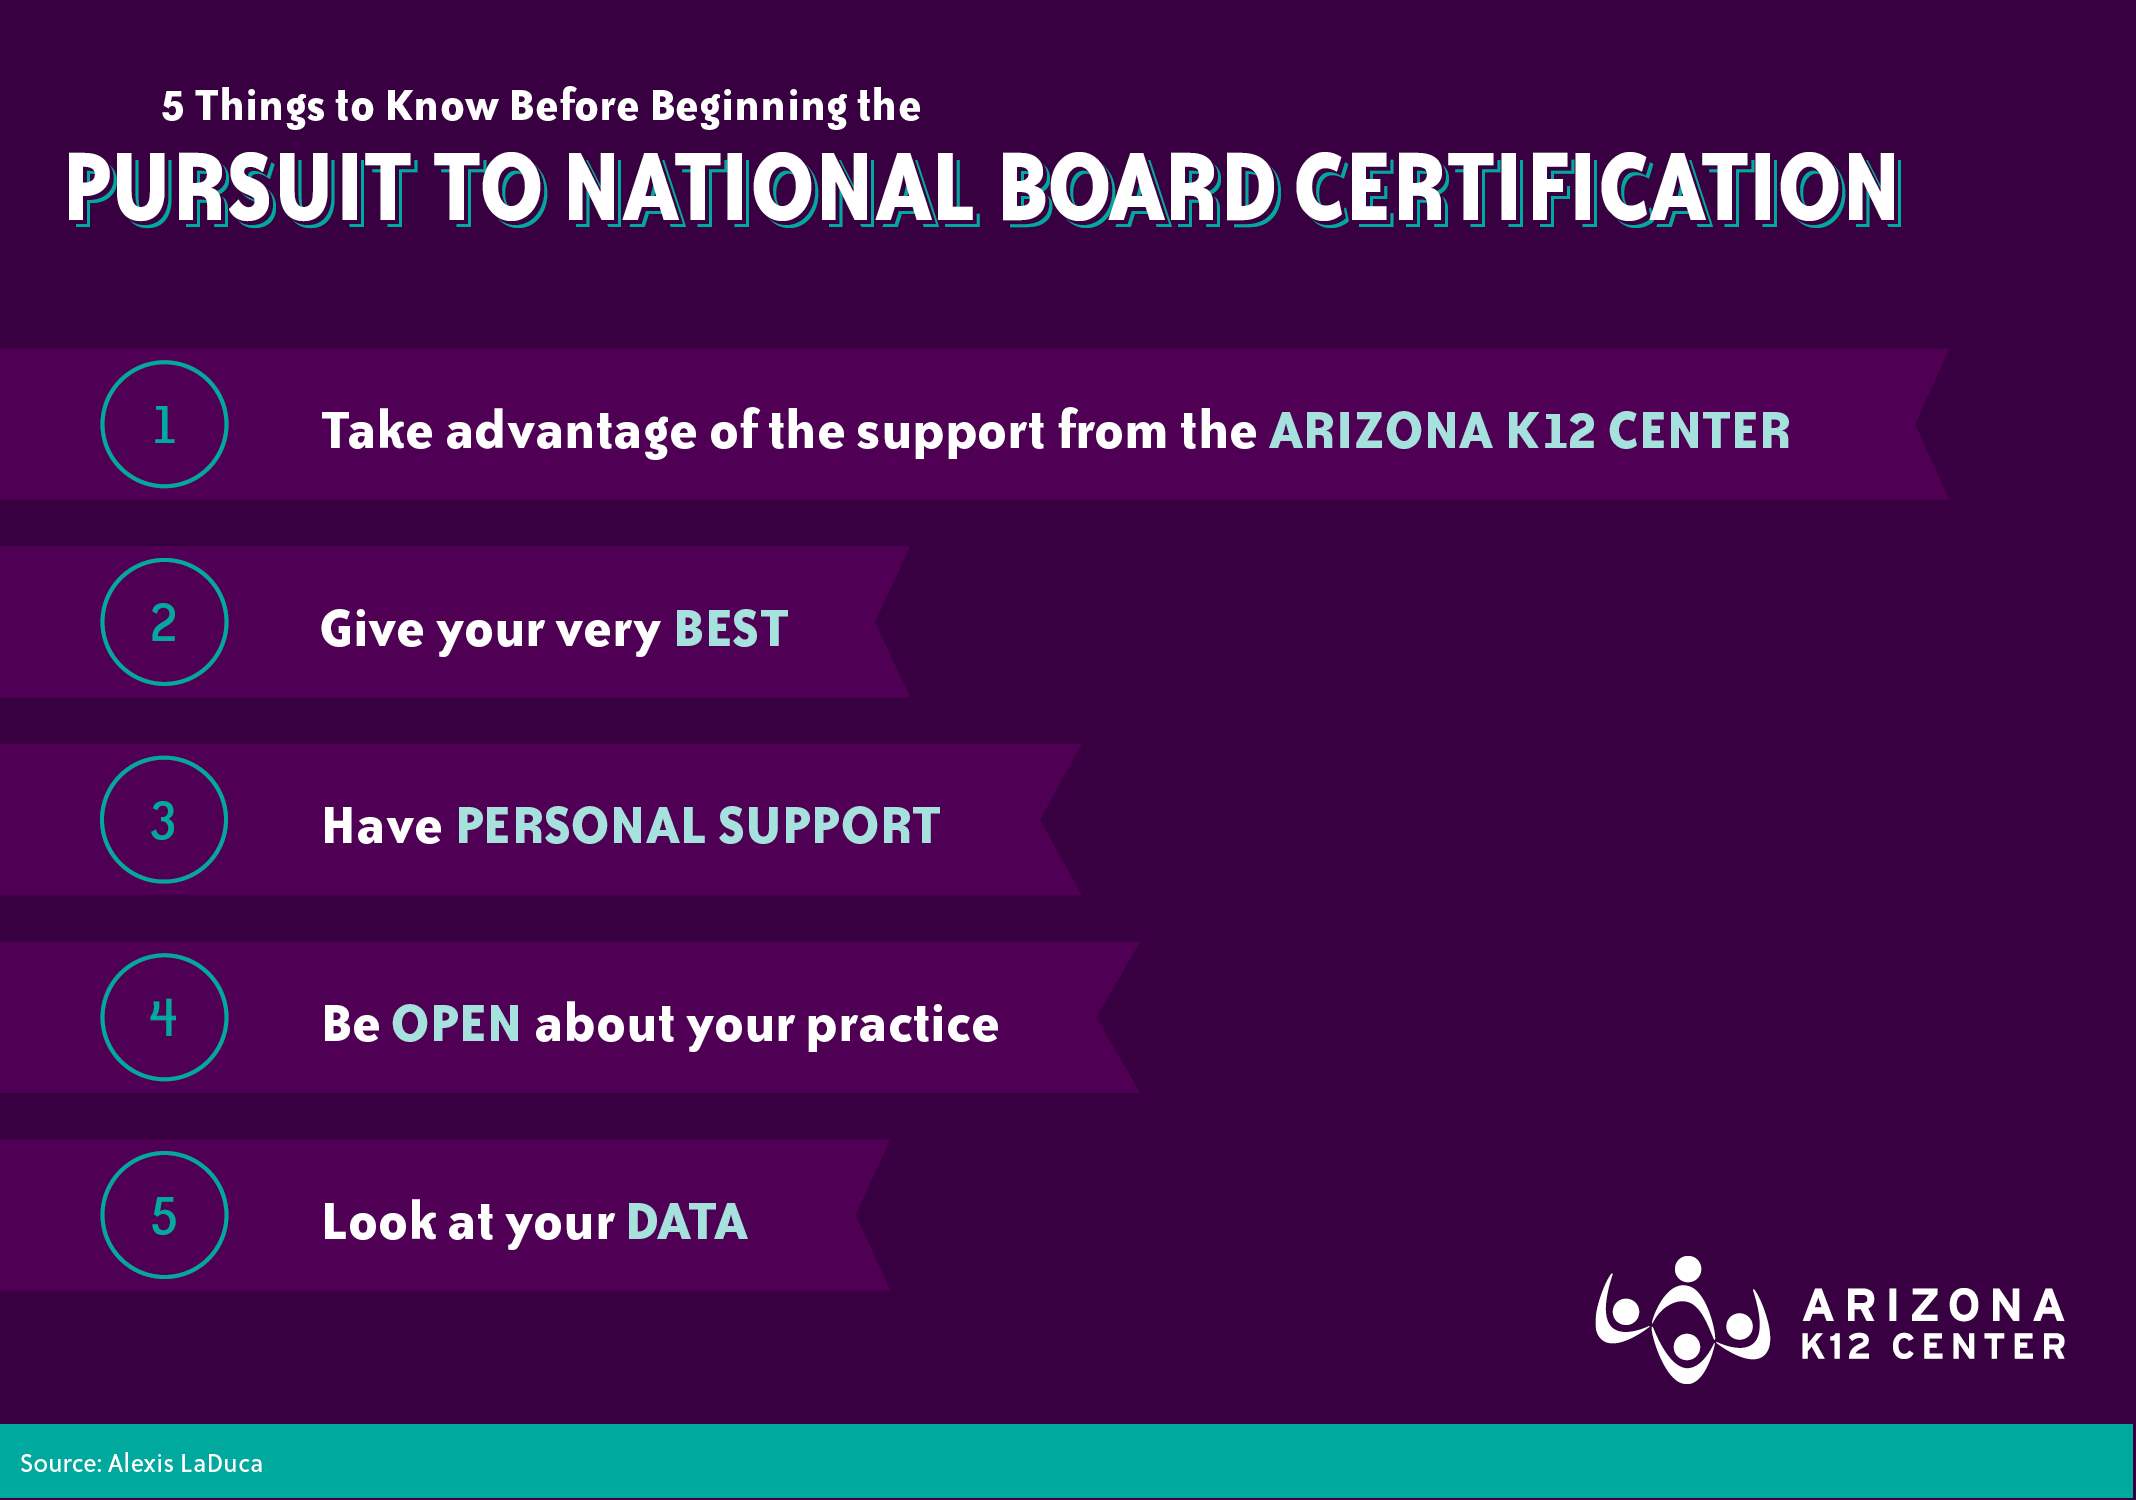 5 Tips for National Board Certification